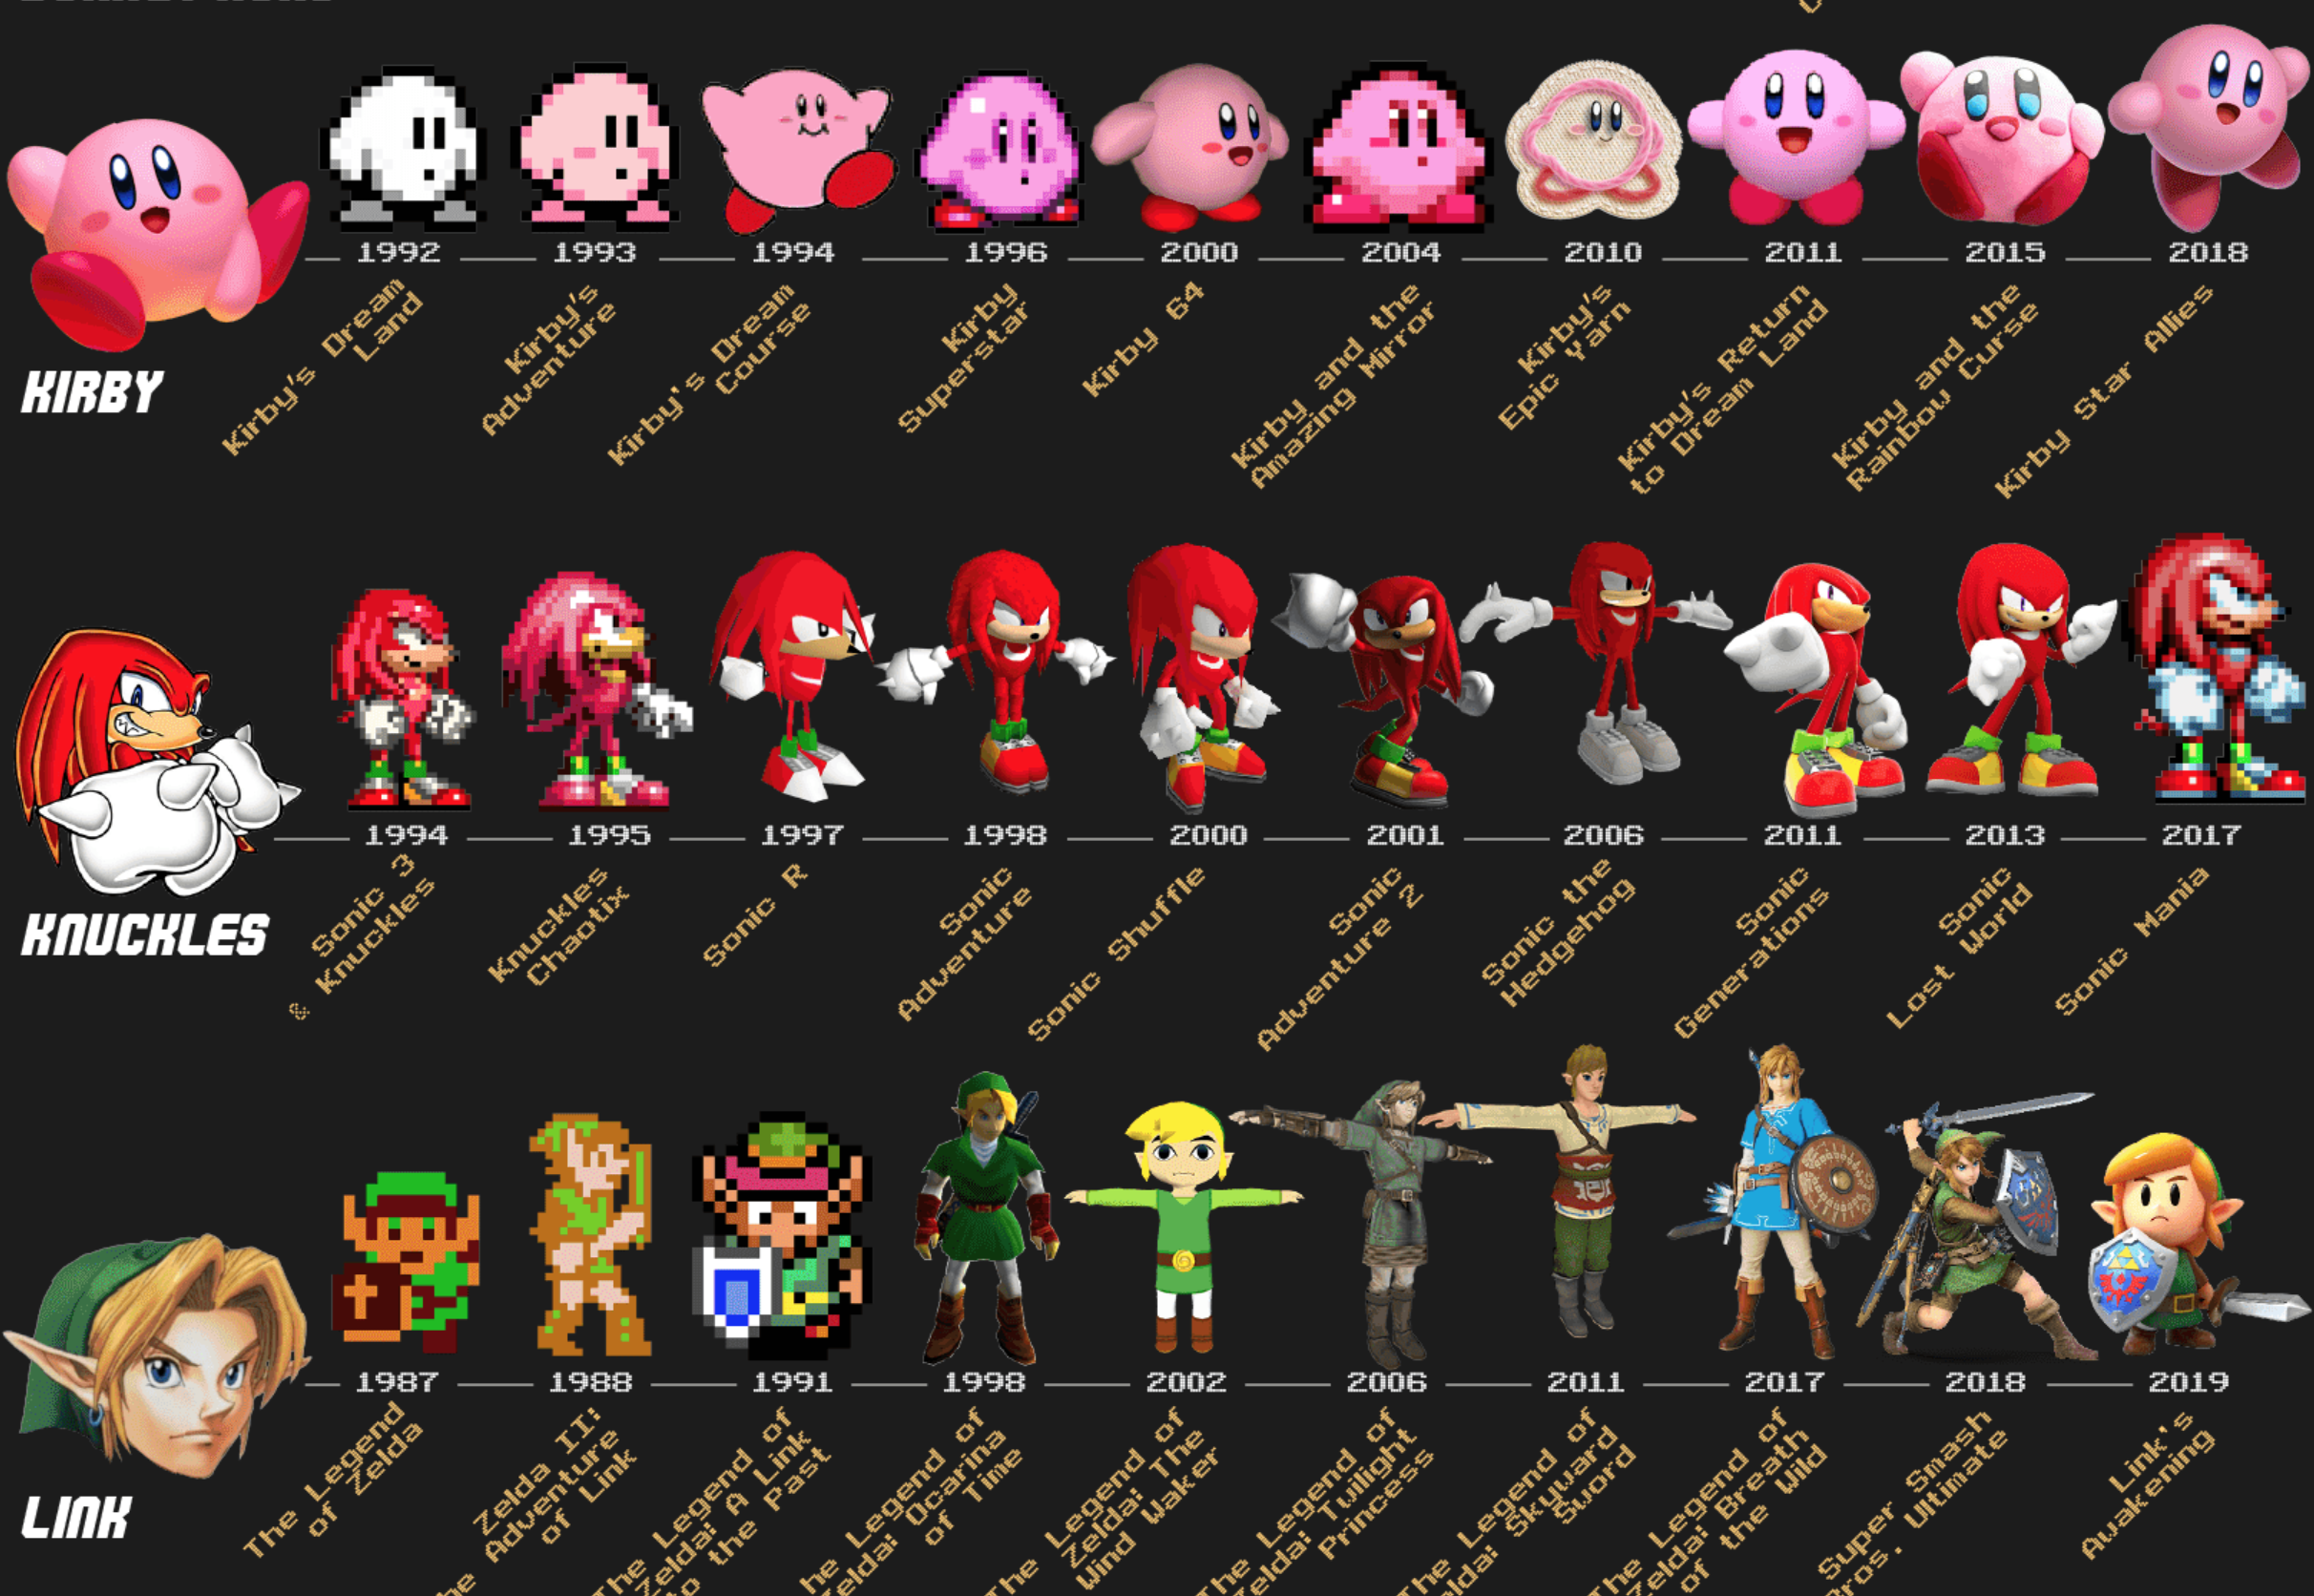 the in-game evolution of video game characters over time - through the years - kirby knuckles link